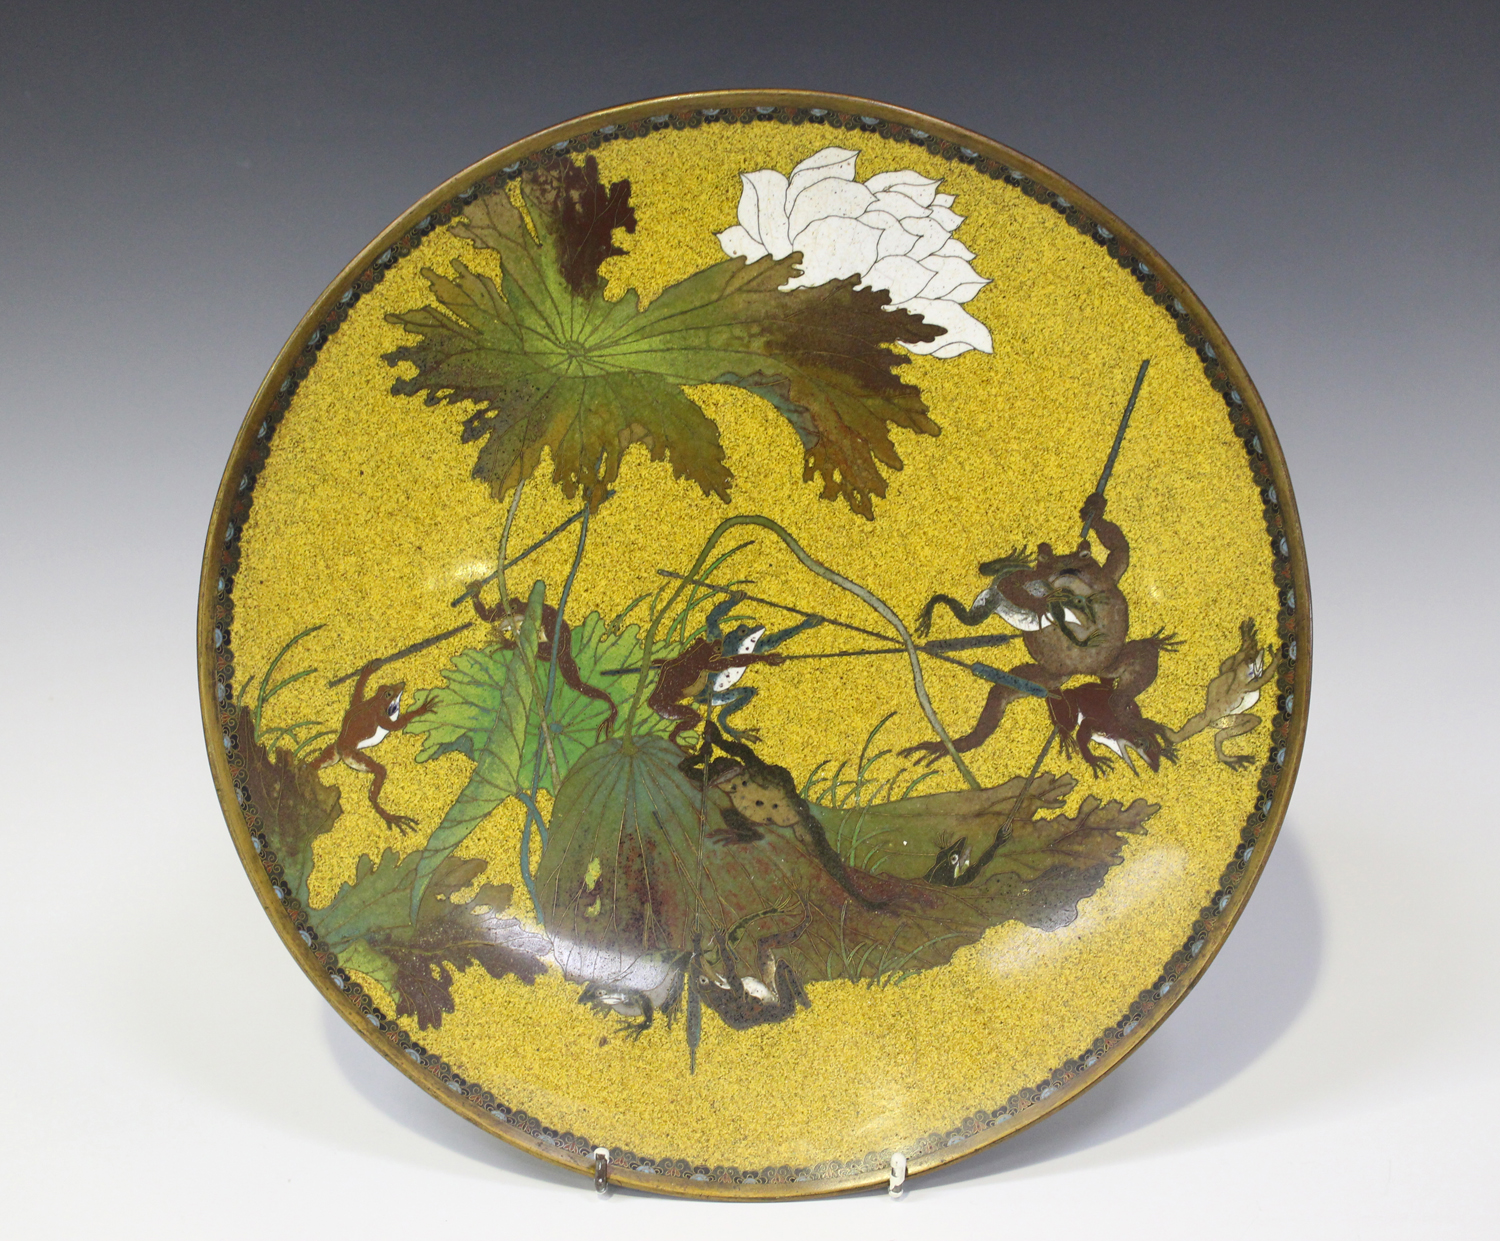 A Japanese cloisonné circular dish, Meiji period, decorated with battling frogs and toads using